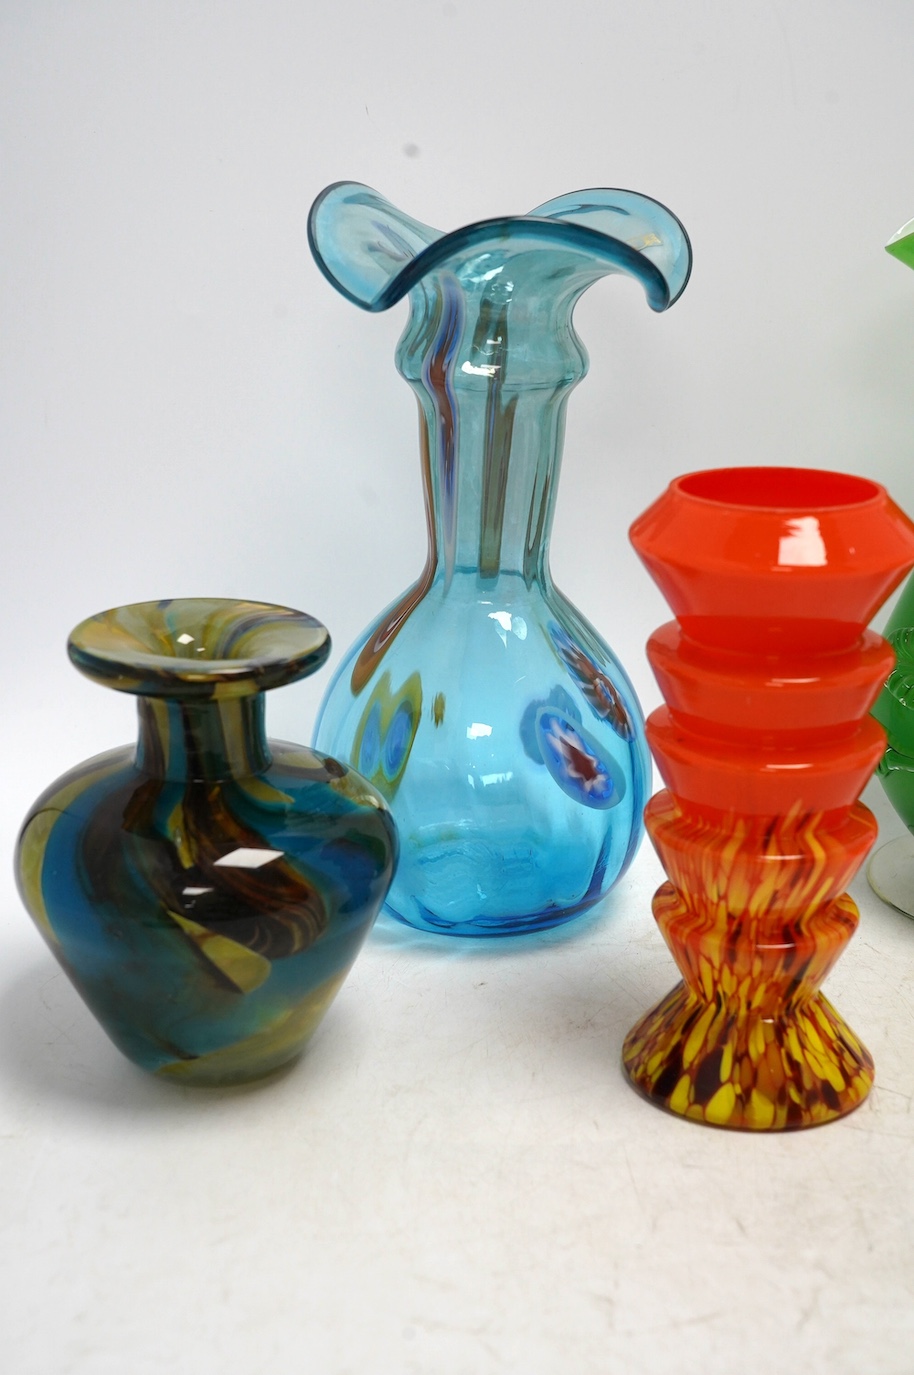 Five ornamental coloured vases, including a Mdina Tiger vase and a Viking vase, tallest 25cm high. Condition - fair to good, no visible cracks